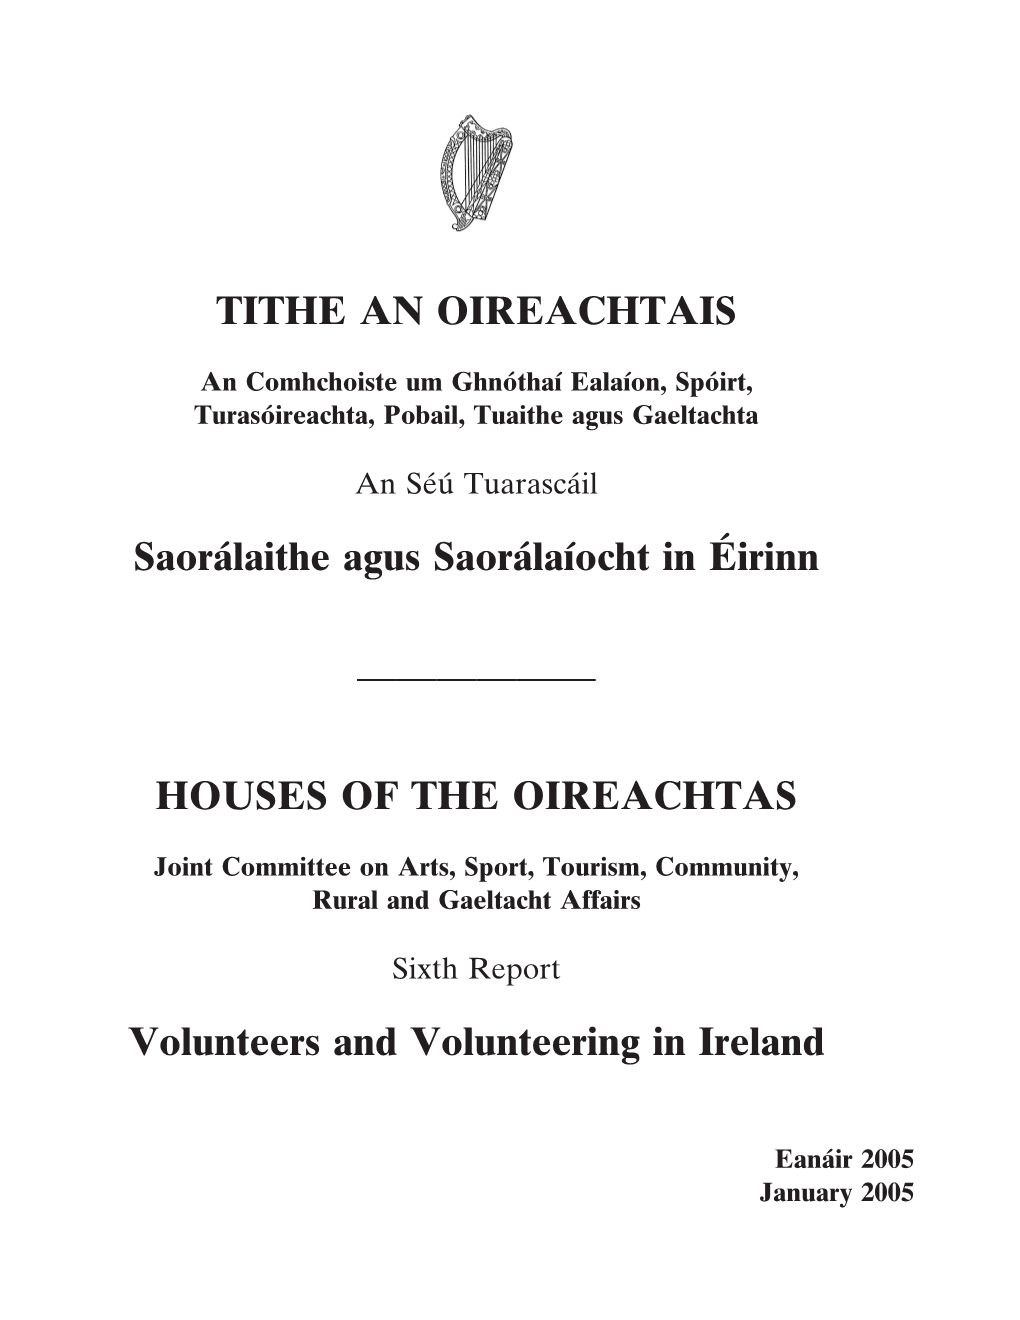 HOUSES of the OIREACHTAS Volunteers and V